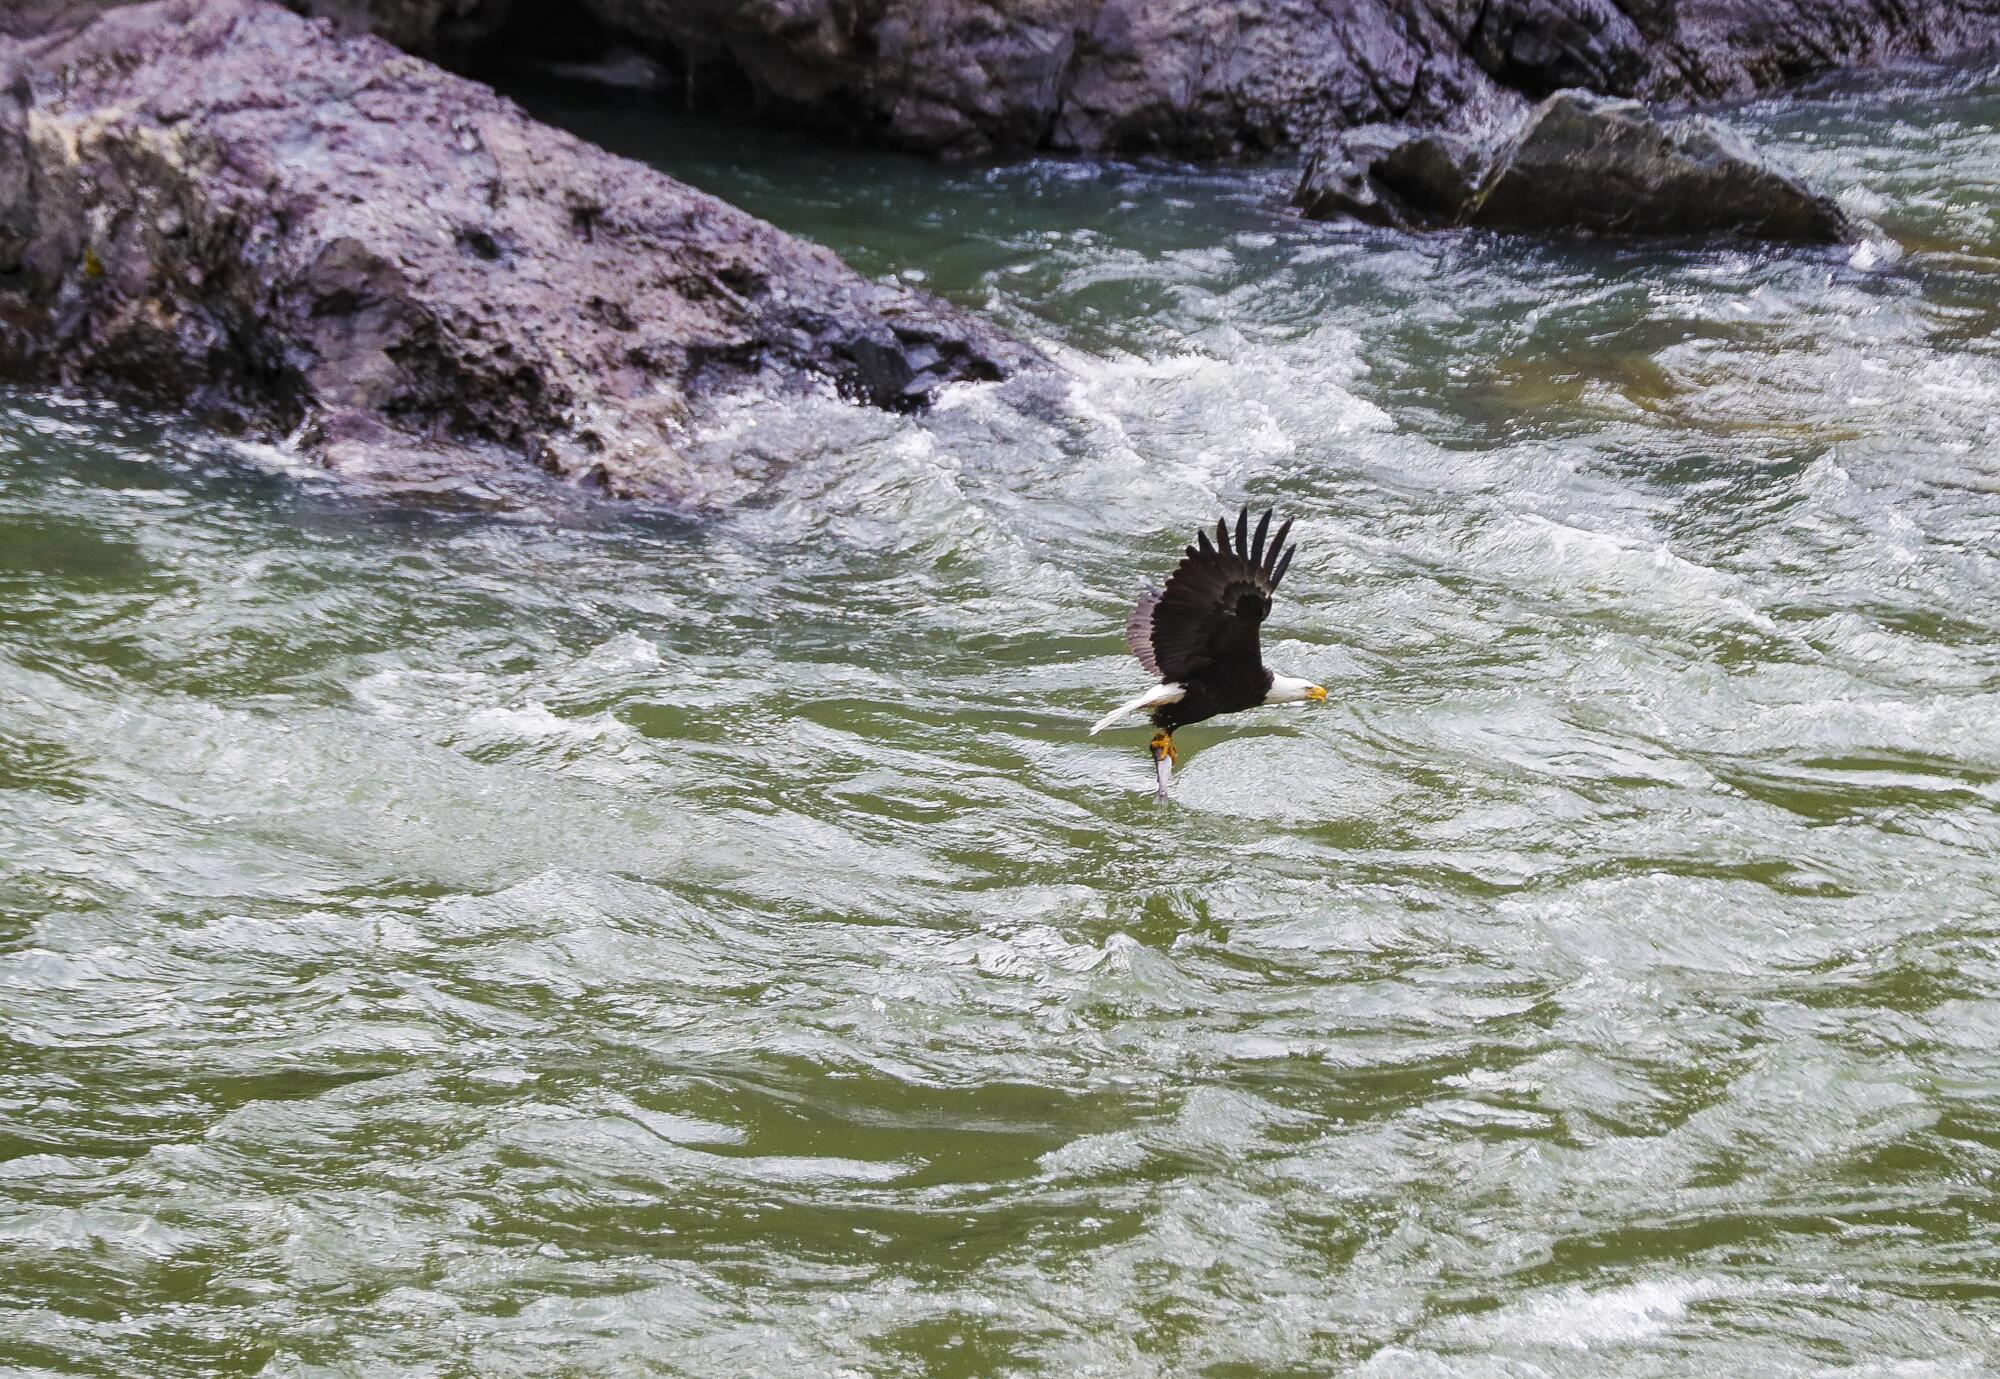 An eagle makes off with a fish in its talons as it soars through Hells Canyon on the Snake River.